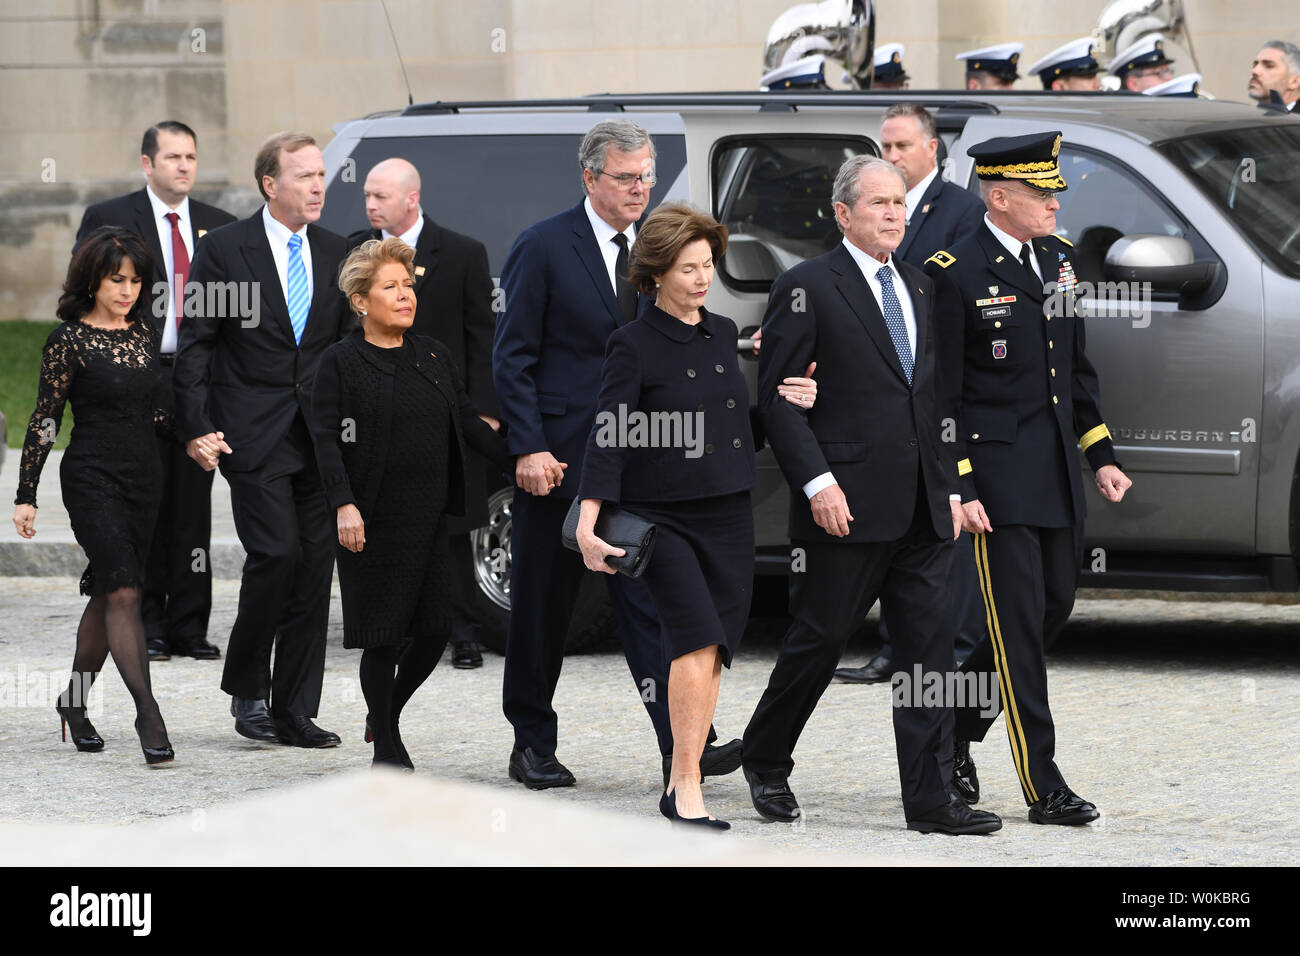 Former President Georrge W. Bush (R), Jeb Bush (C) and Neil Bush and their wives, watch the casket of President George H.W. Bush arrive at the National Catherdral for his funeral in Washington D.C. on December 5, 2018.  Photo by Pat Benic/UPI Stock Photo